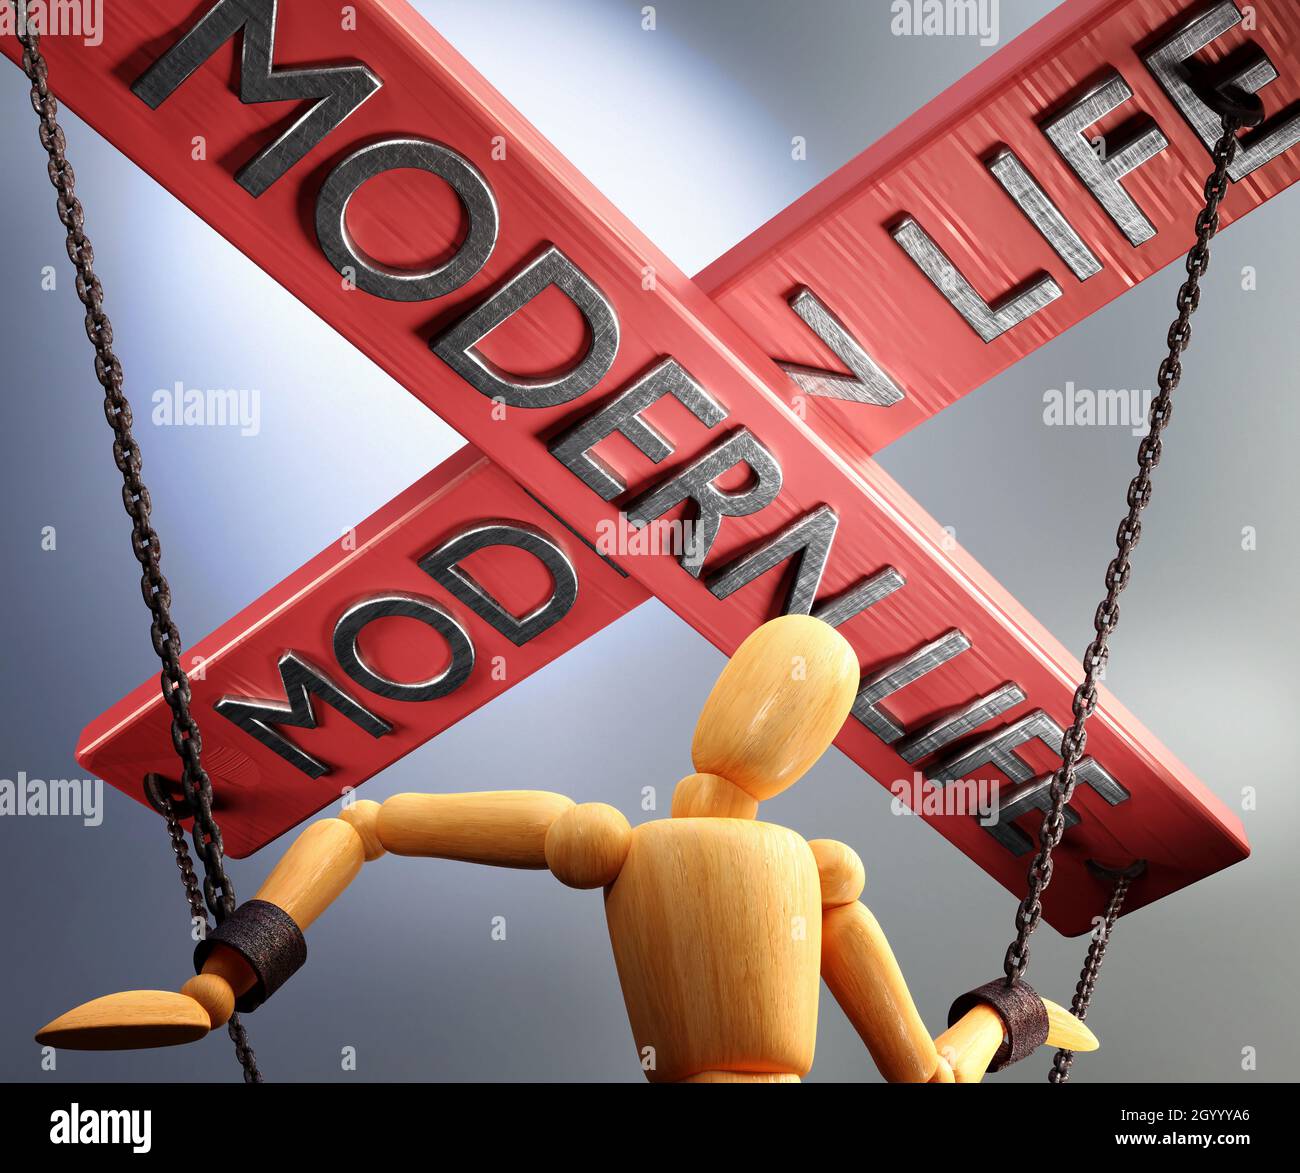 Modern life control, power, authority and manipulation symbolized by control bar with word Modern life pulling the strings (chains) of a wooden puppet Stock Photo